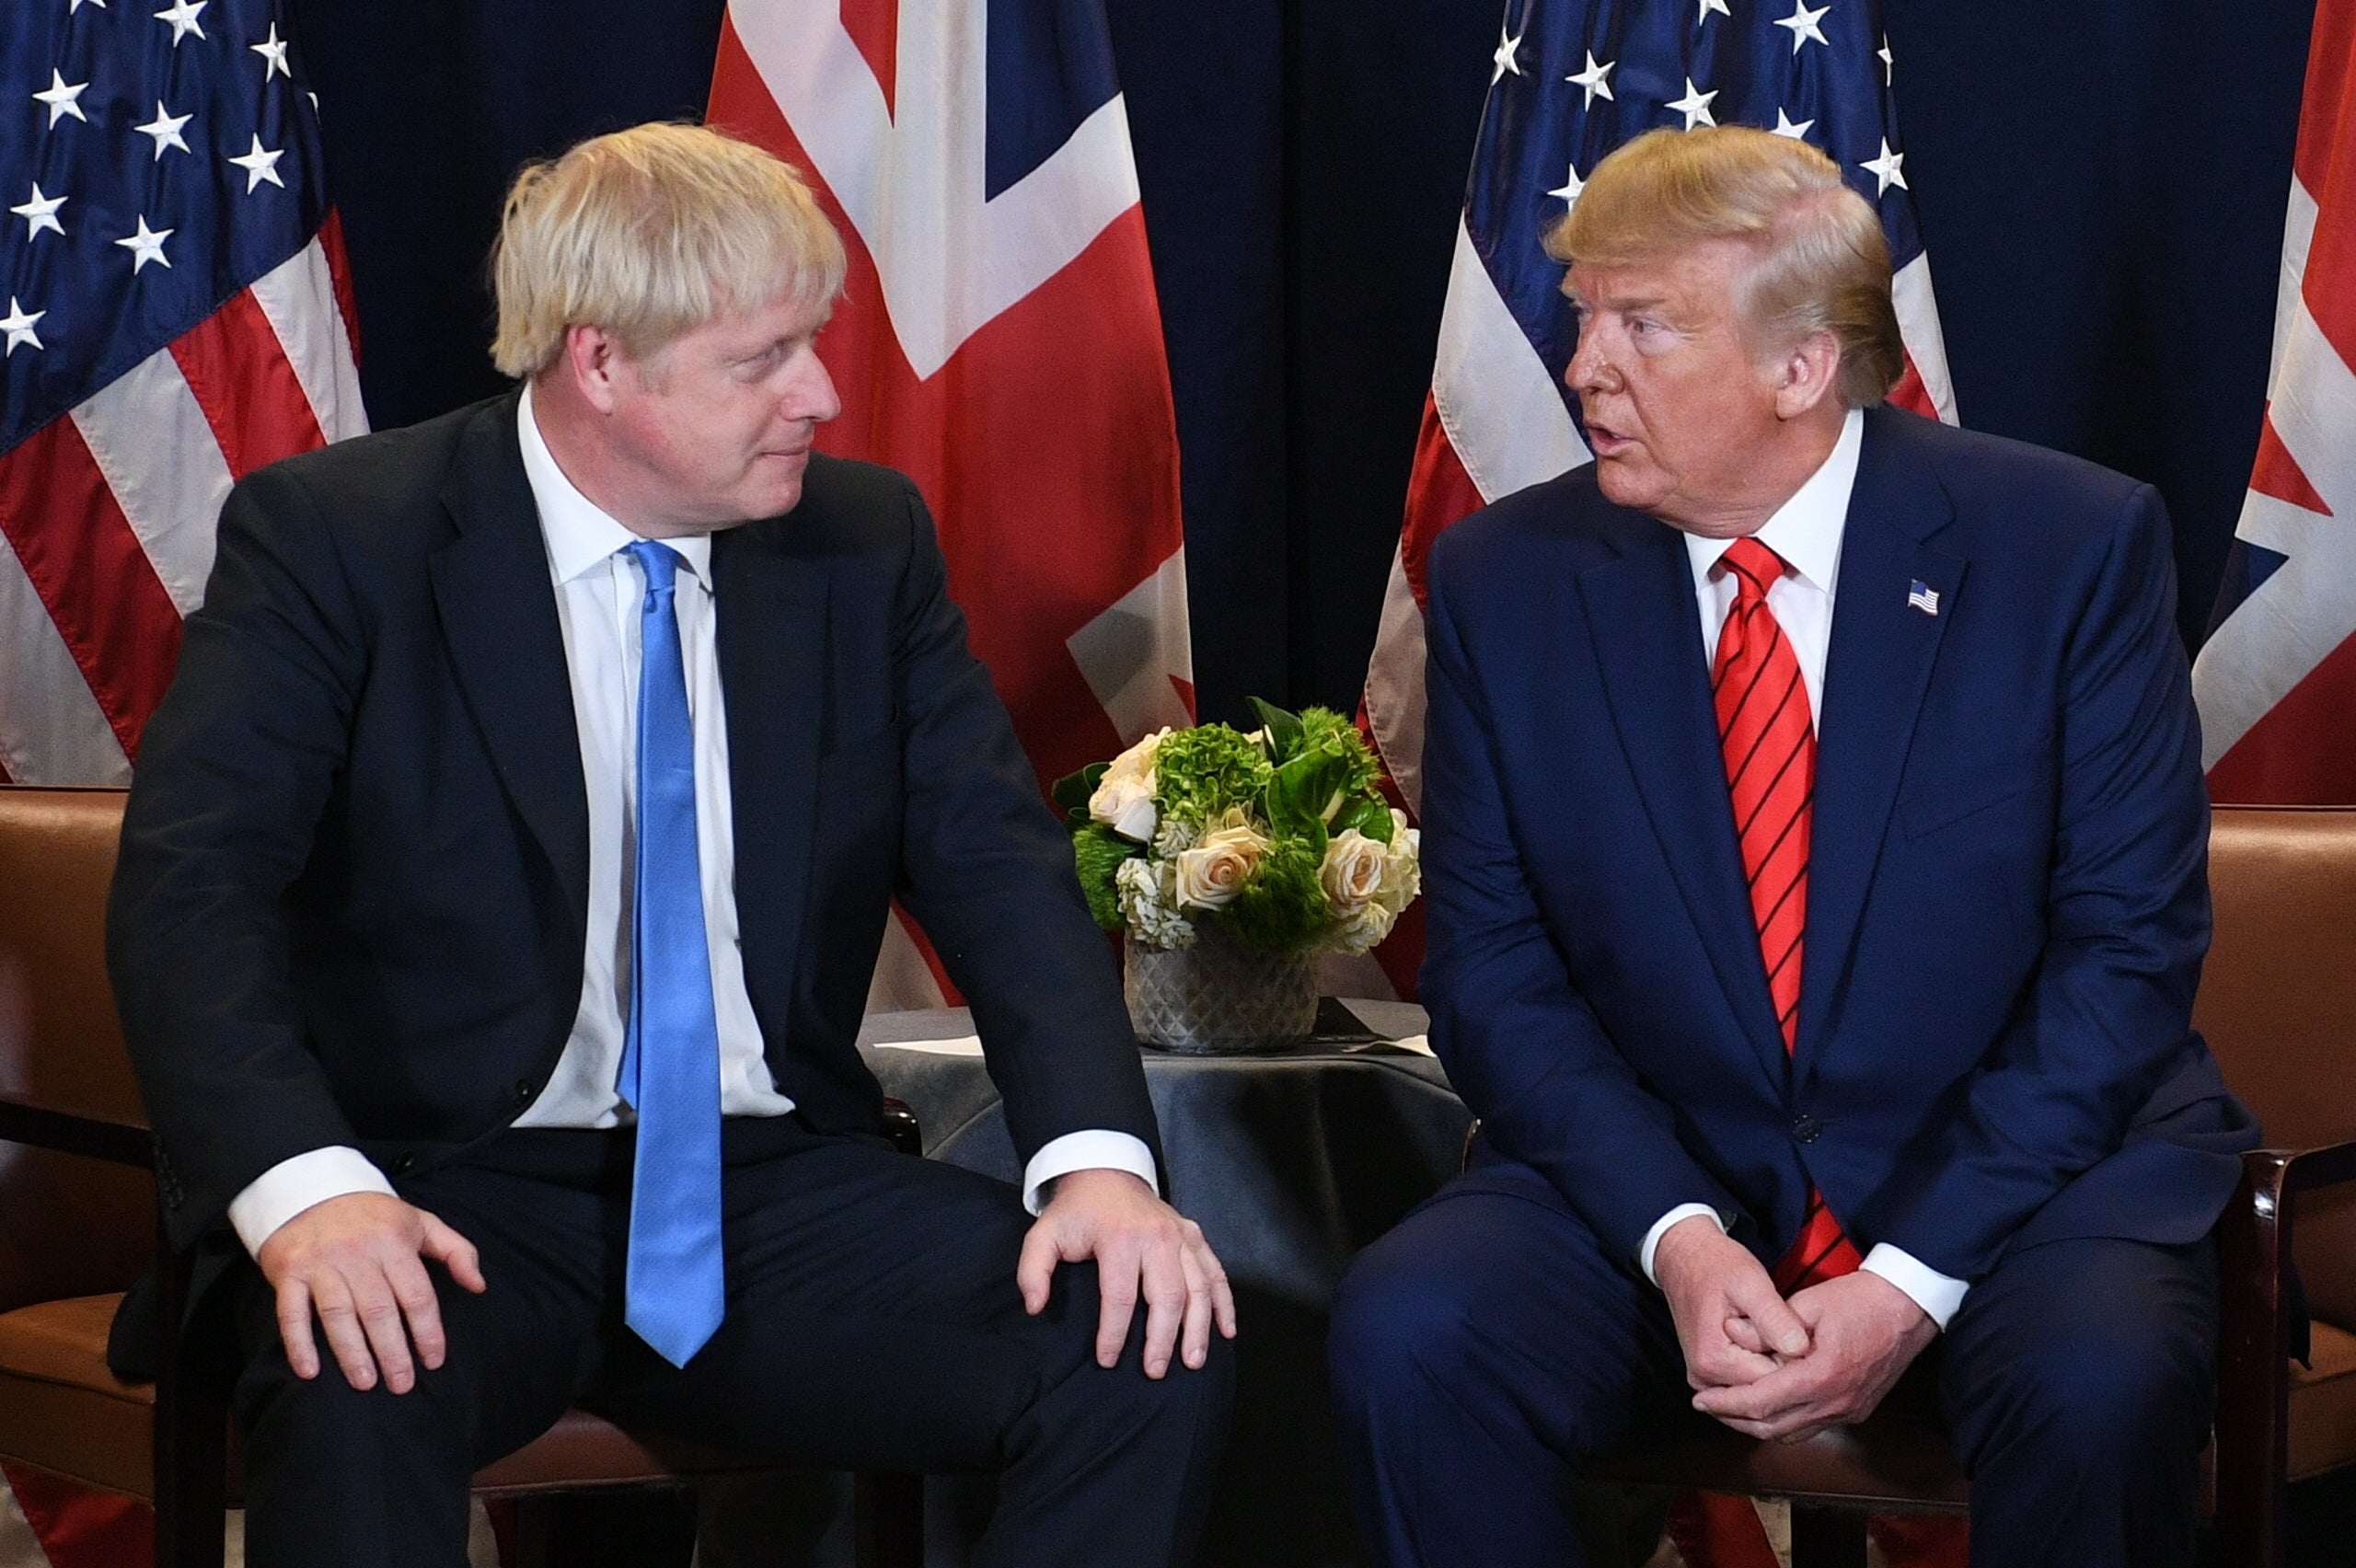 Both Boris Johnson and Donald Trump have been guilty of that which they have sought to accuse their rivals